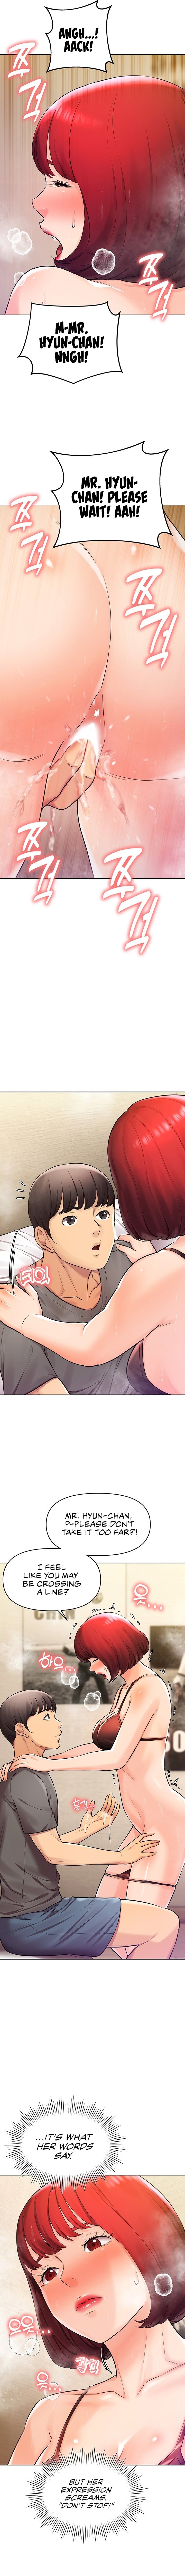 the-girls-i-couldnt-date-before-chap-23-6